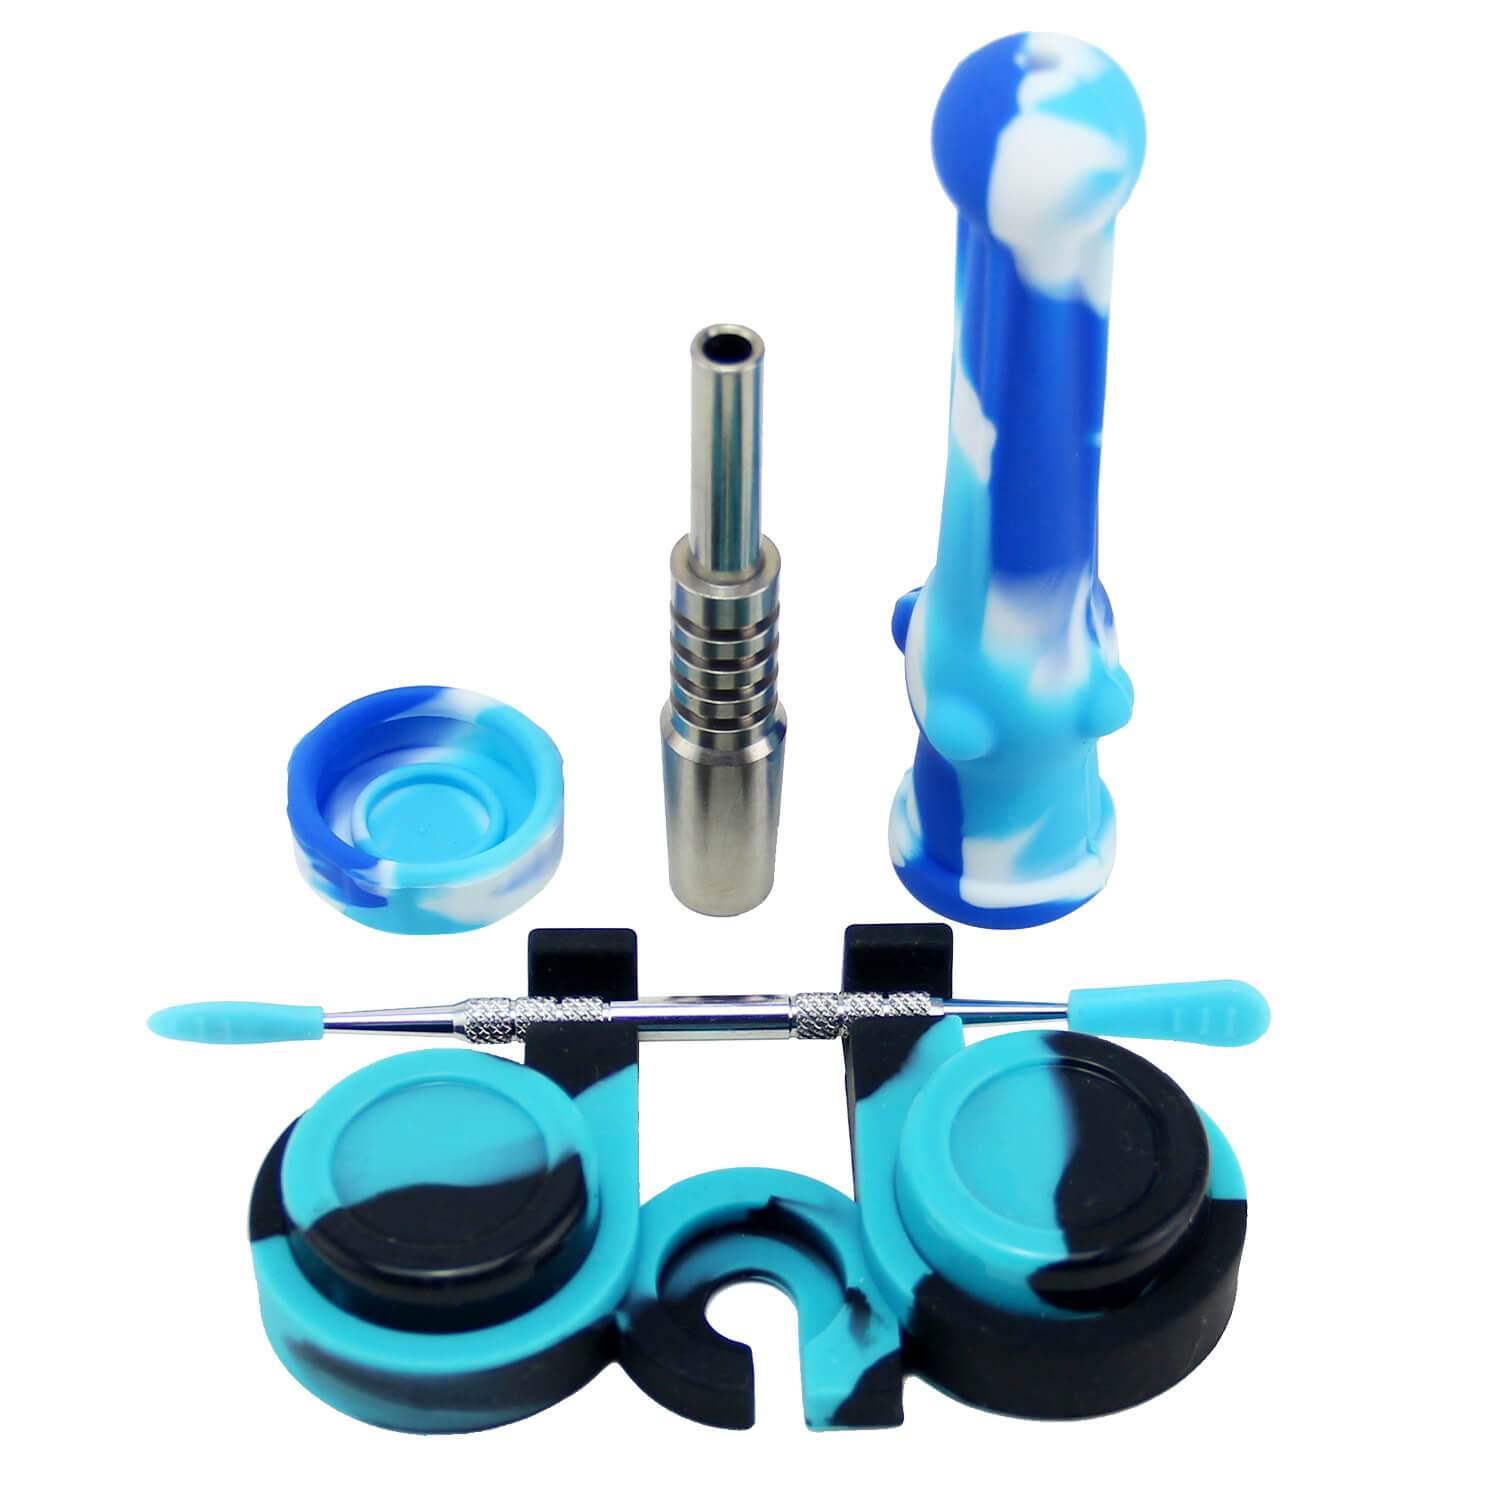 Silicone Nectar Collector Dab Kit - PILOT DIARY